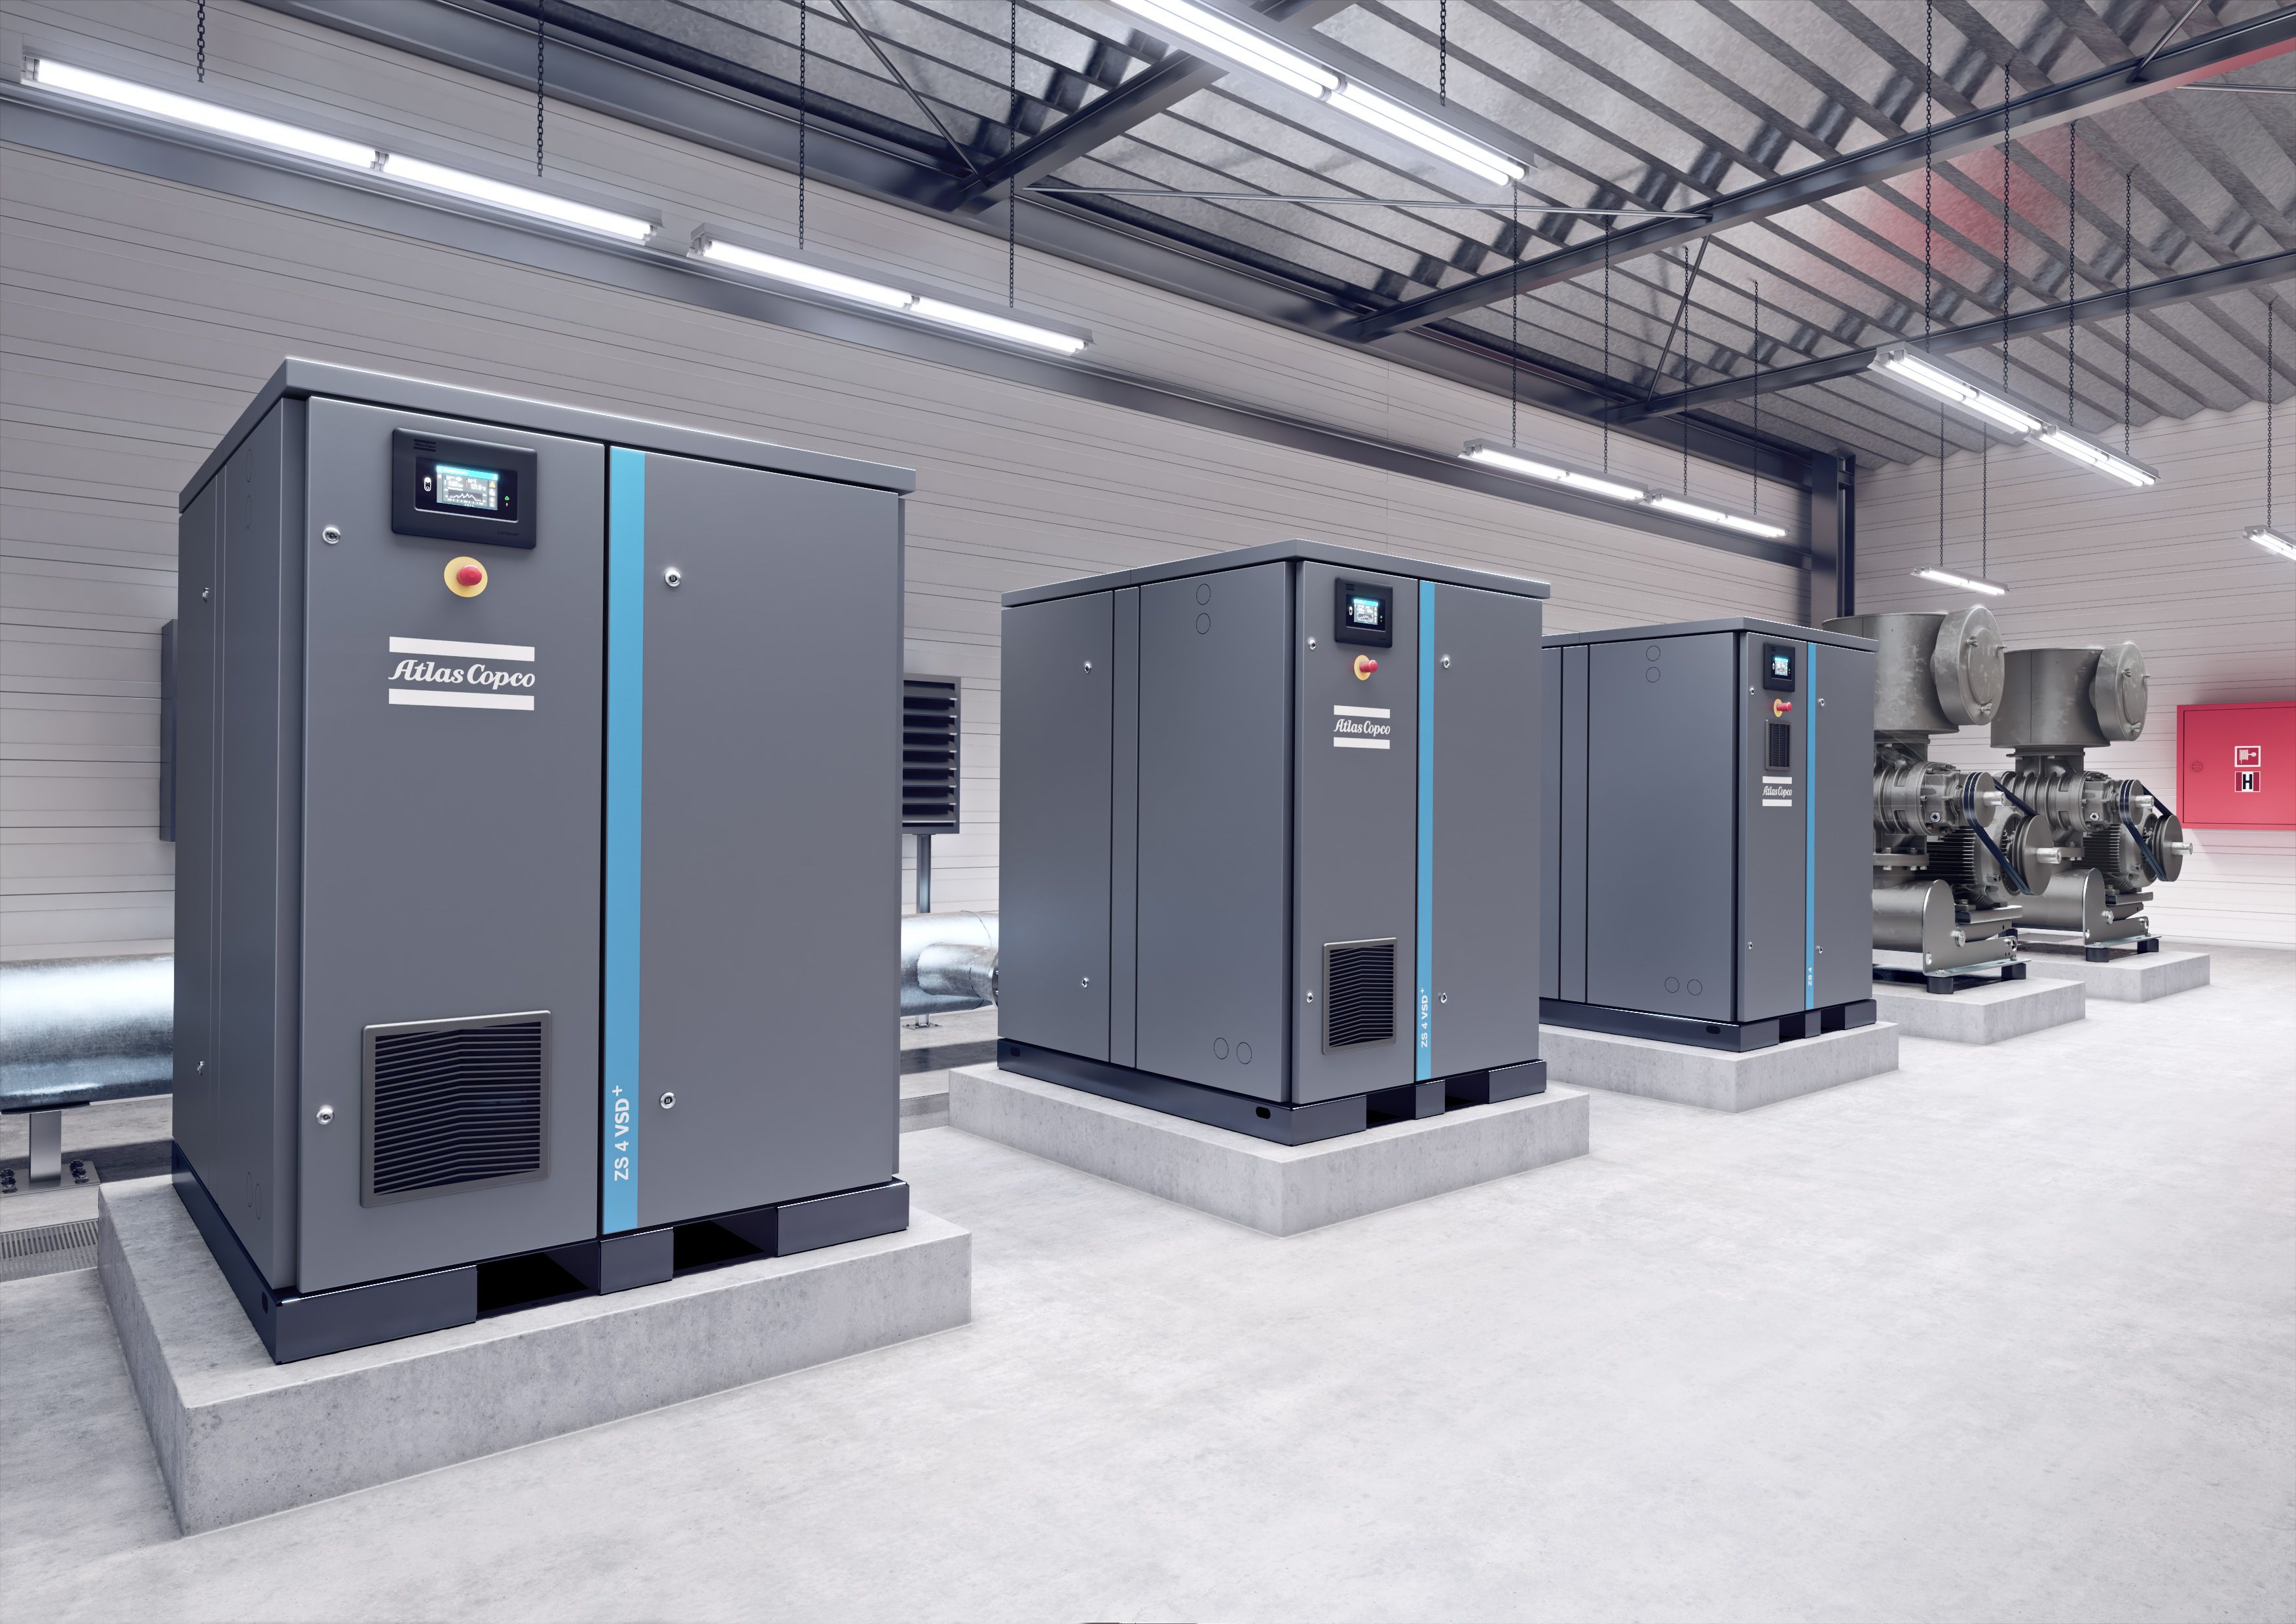 Atlas Copco has unveiled the new energy-efficient ZS 4 VSD+ blowers.